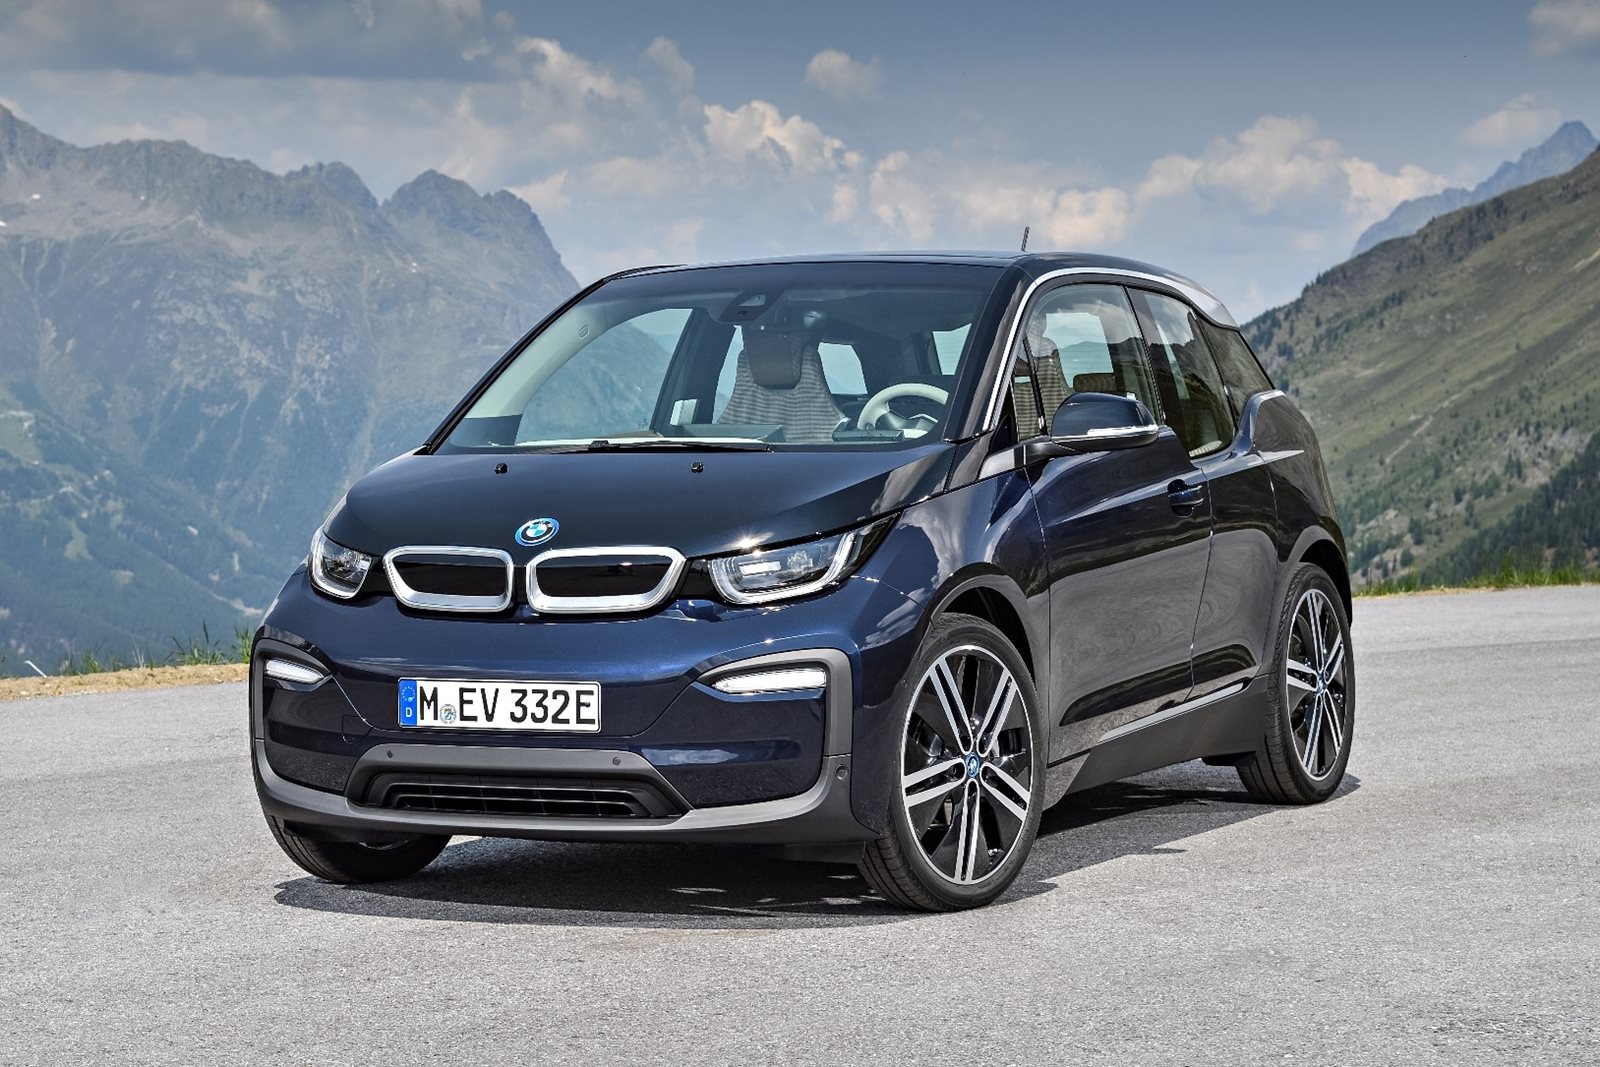 BMW i3: Second Hand Range & Battery & Cost